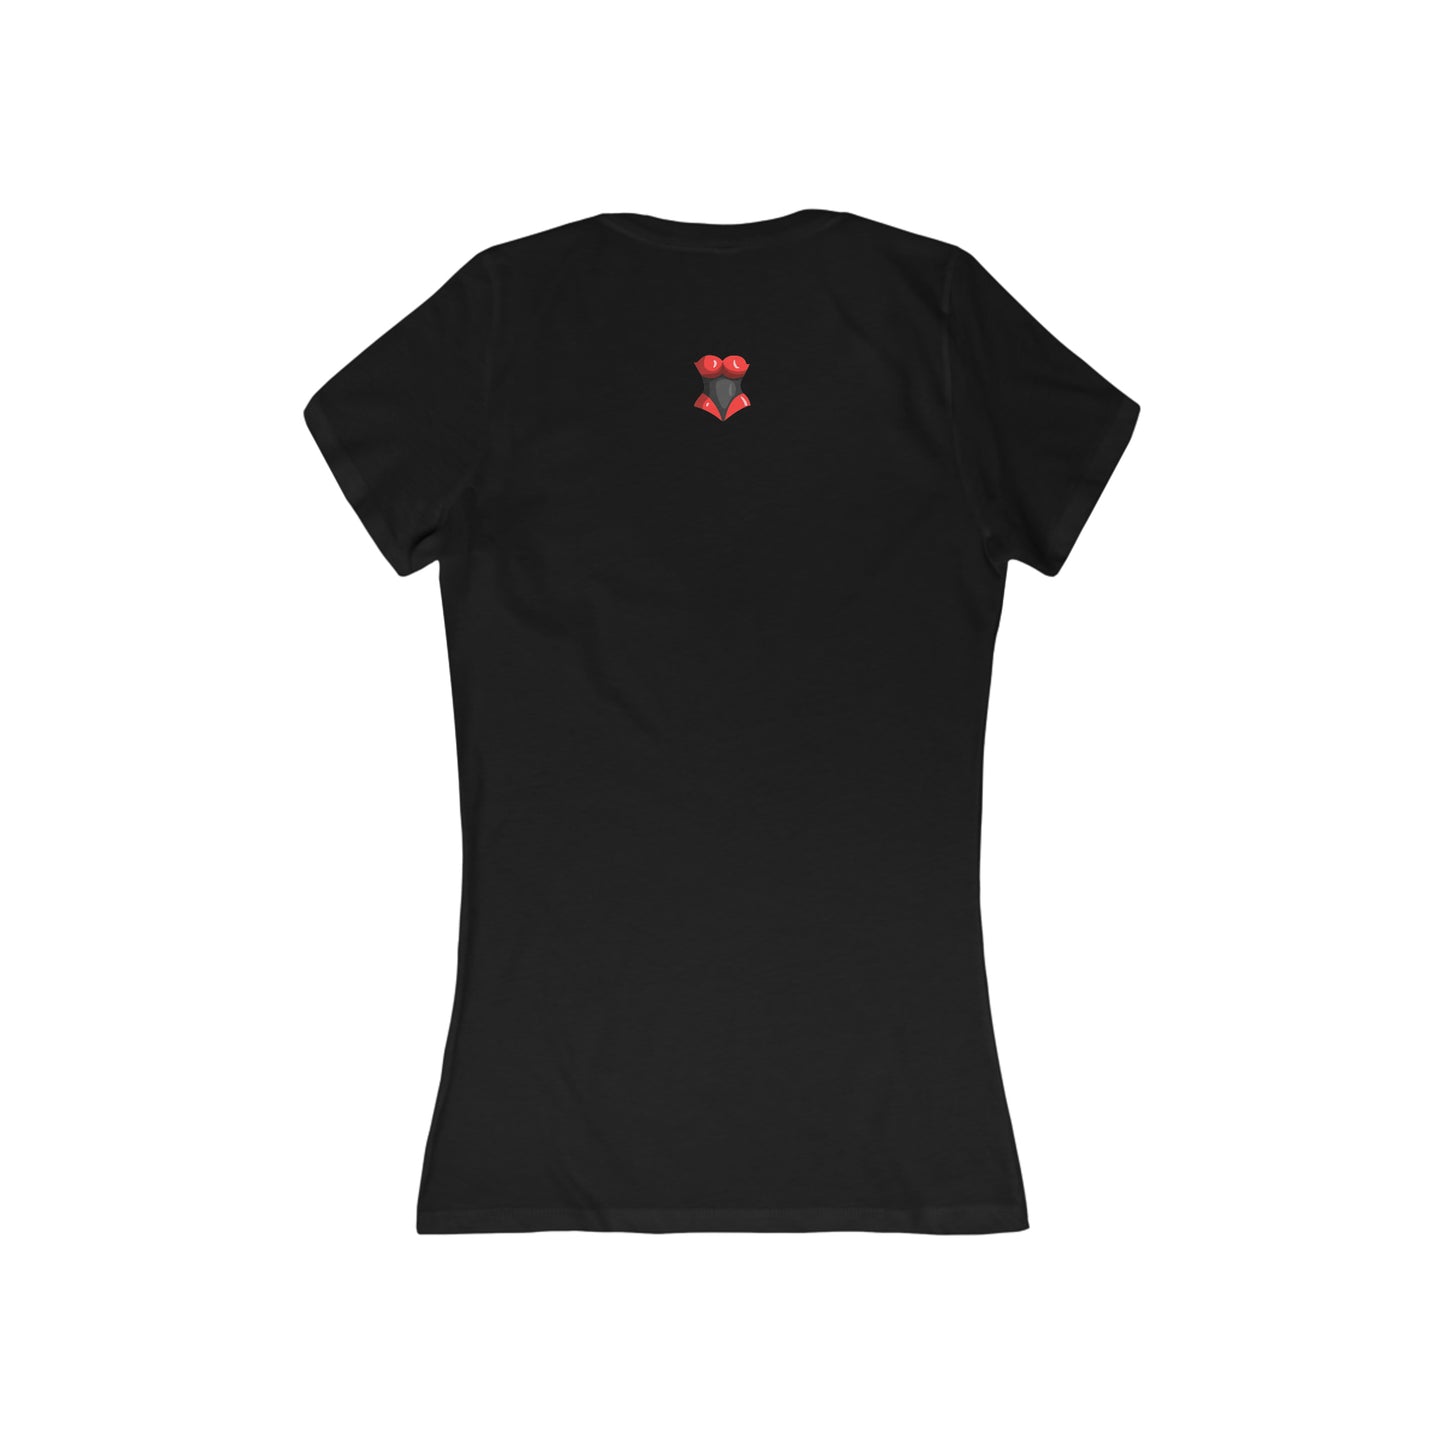 The submissive Smile | Fitted V-Neck Tee